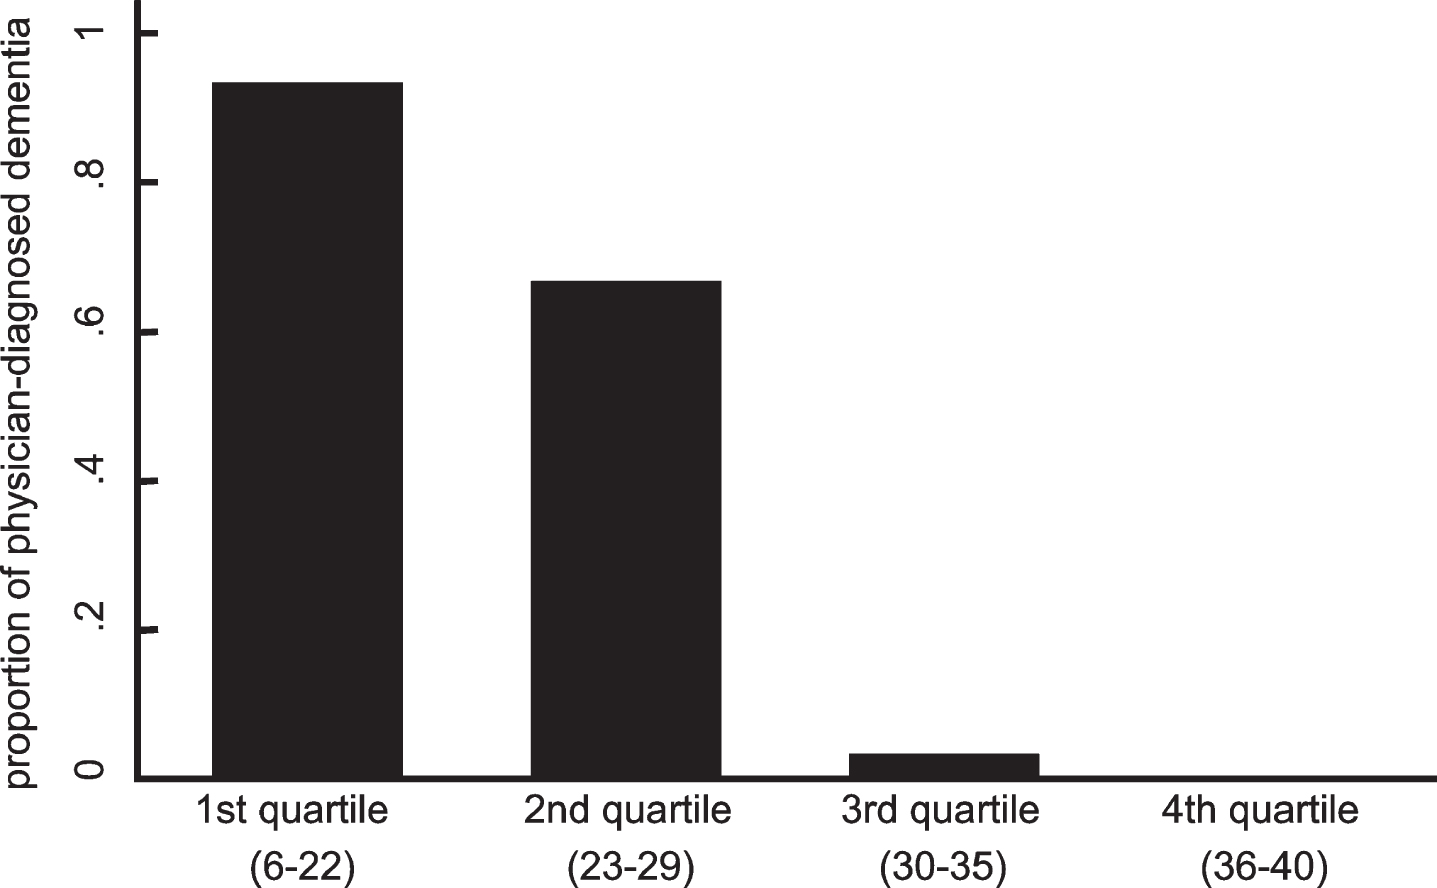 Relationship between the proportion of physician-diagnosed dementia and quartiles of the total score of the ReaCT Kyoto Test. Dose-response relationships were clearly observed between the proportion of having definitive diagnosis of dementia and quartiles of the total score of ReaCT Kyoto Test.